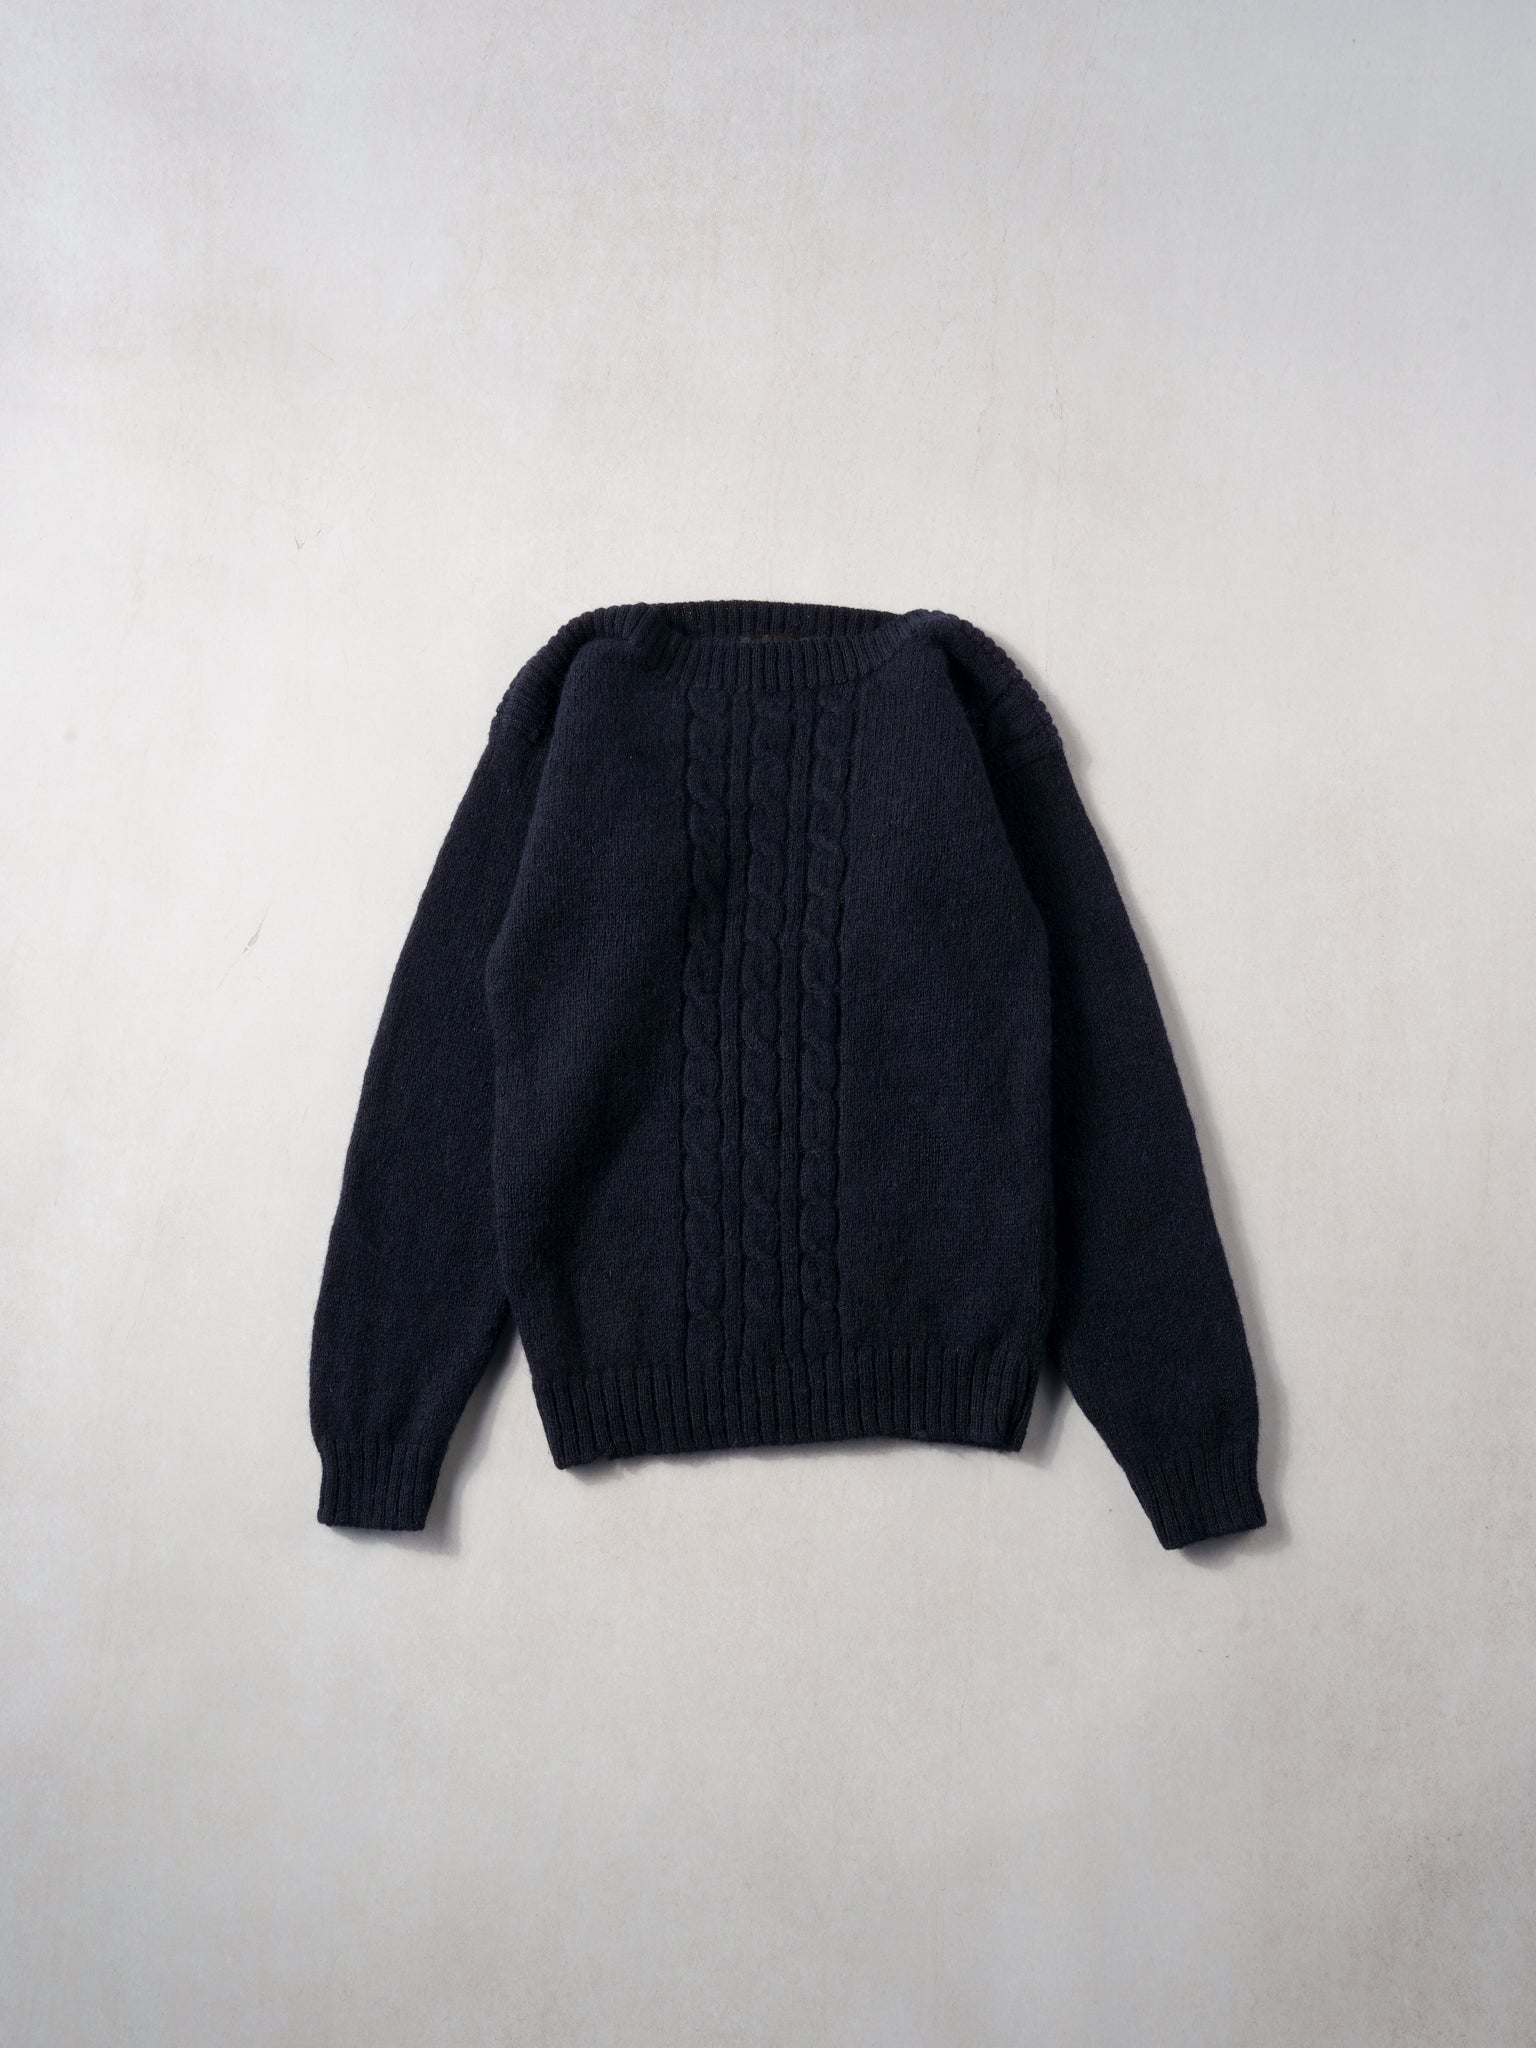 Vintage 90s Navy Blue YSL Cable Knit Pattern Wool Sweater (XS)